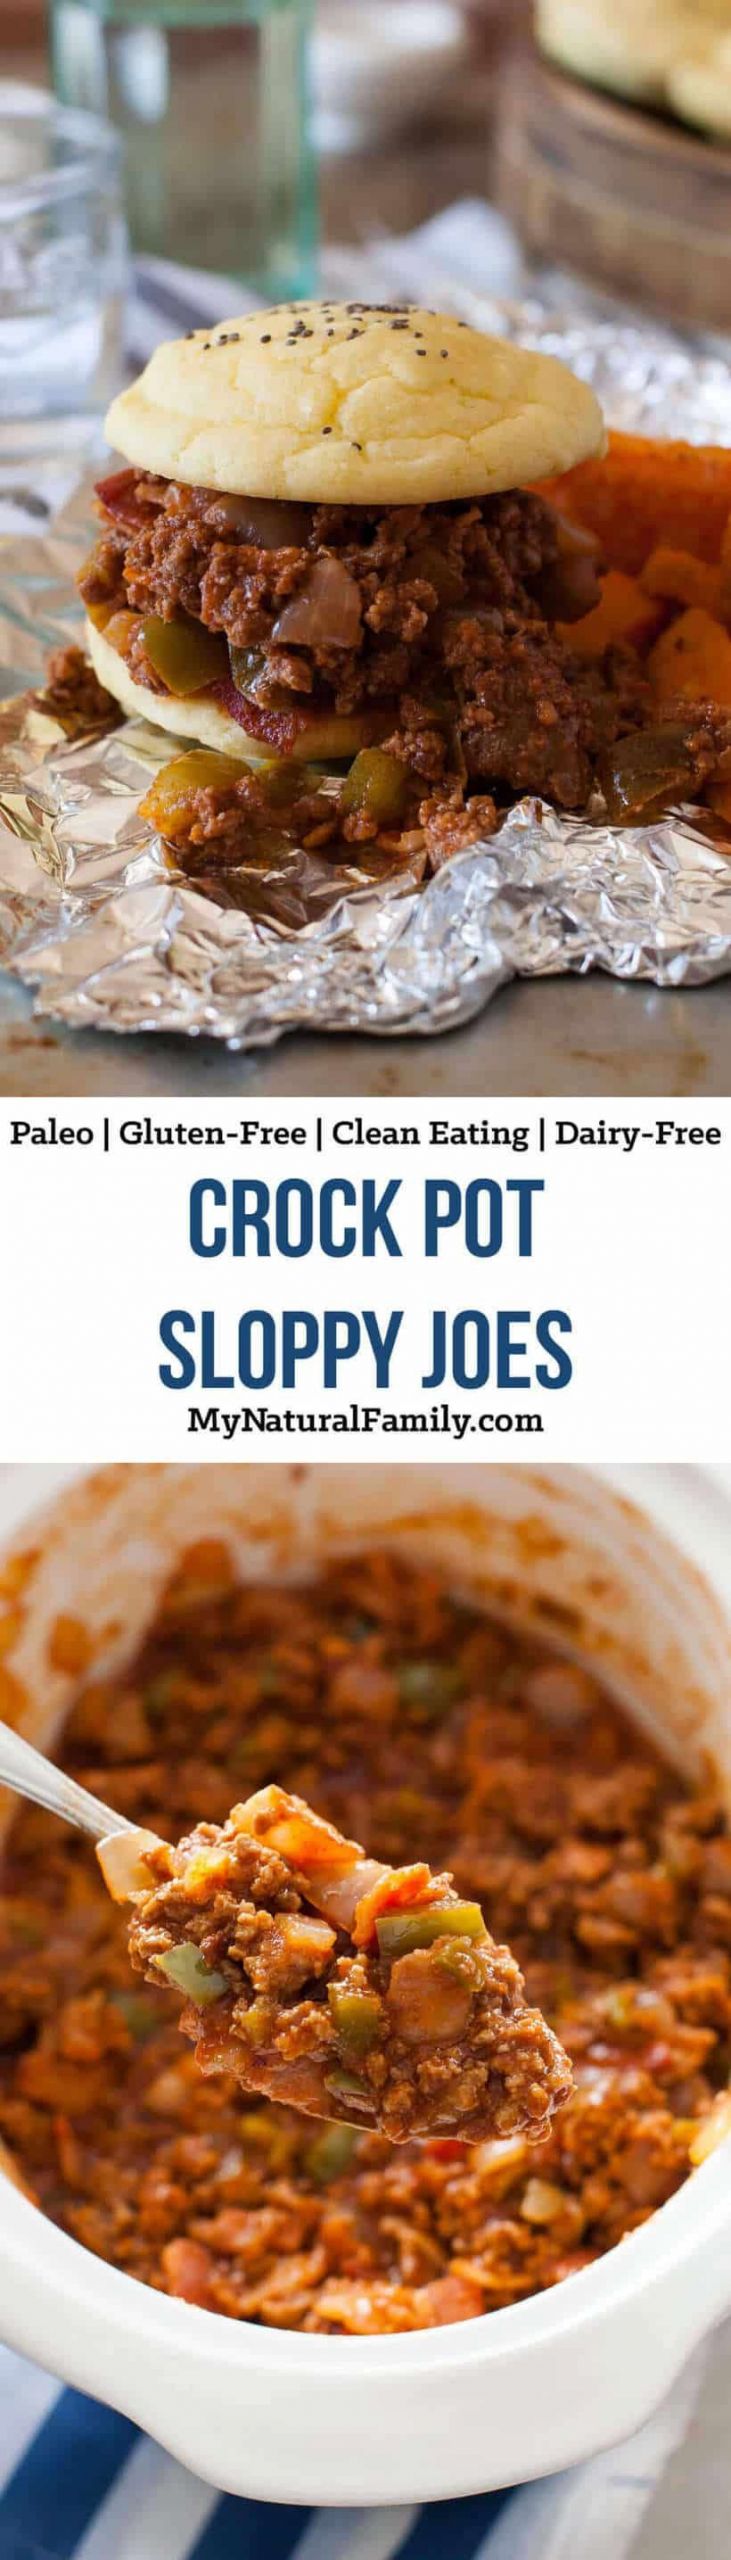 Crock Pot Recipes Kids Like
 9 Paleo Ground Beef Recipes for Inexpensive Meals